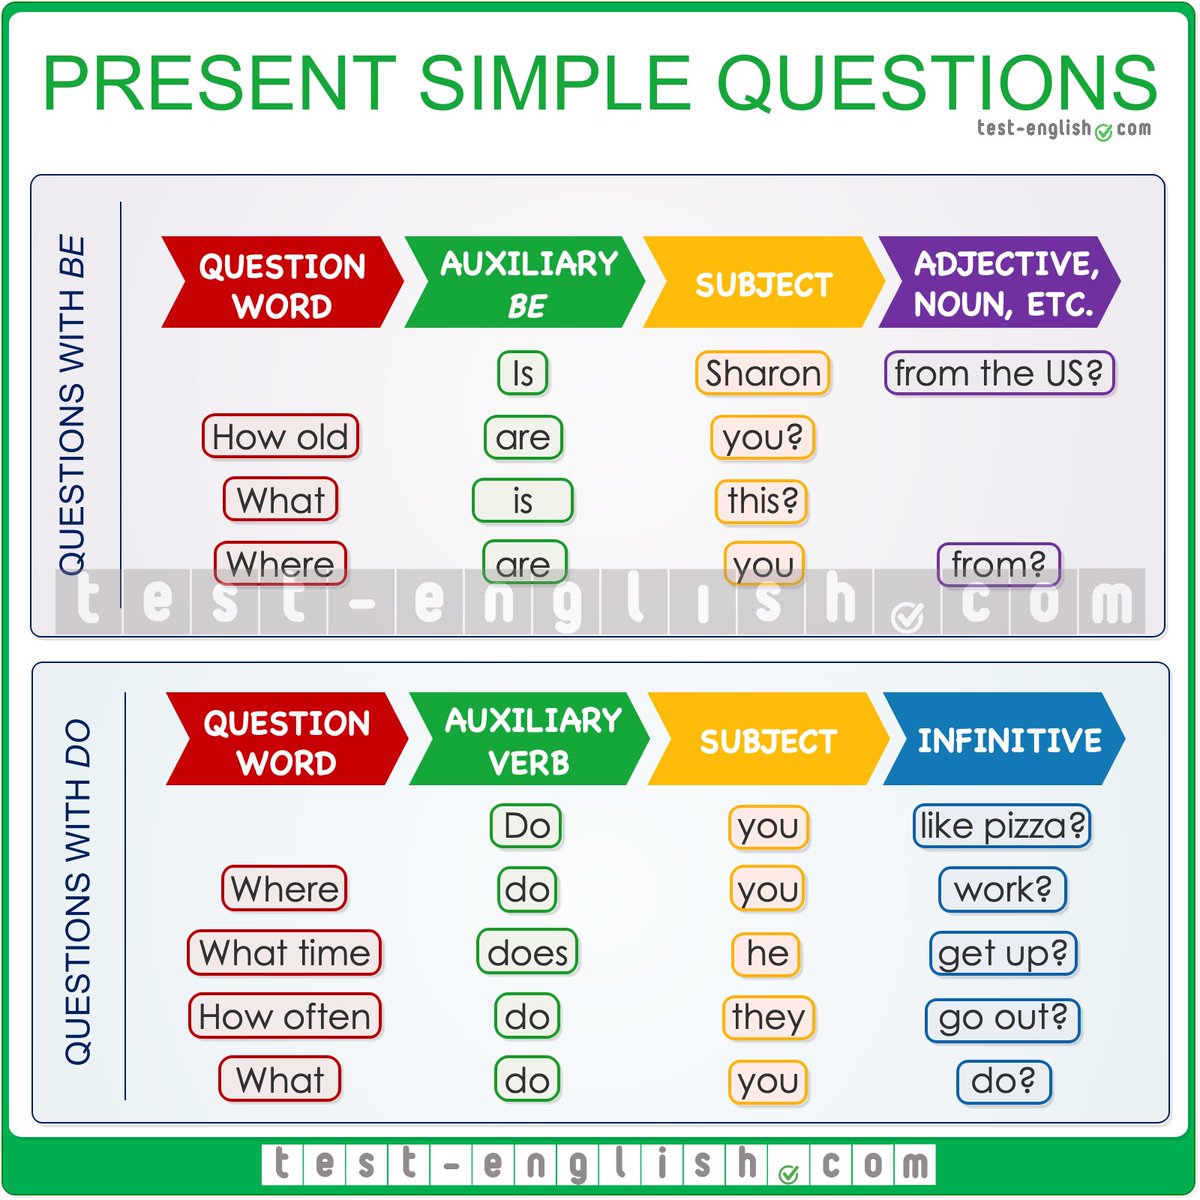 #Grammar Tip of the Day: Asking Questions in Present Simple! 🕒❓

Want to ask someone something in English? Our chart shows you how to use 'do' and 'be' to make questions in the present simple. It's simple and useful for everyday talk! #ESL #LearnEnglish